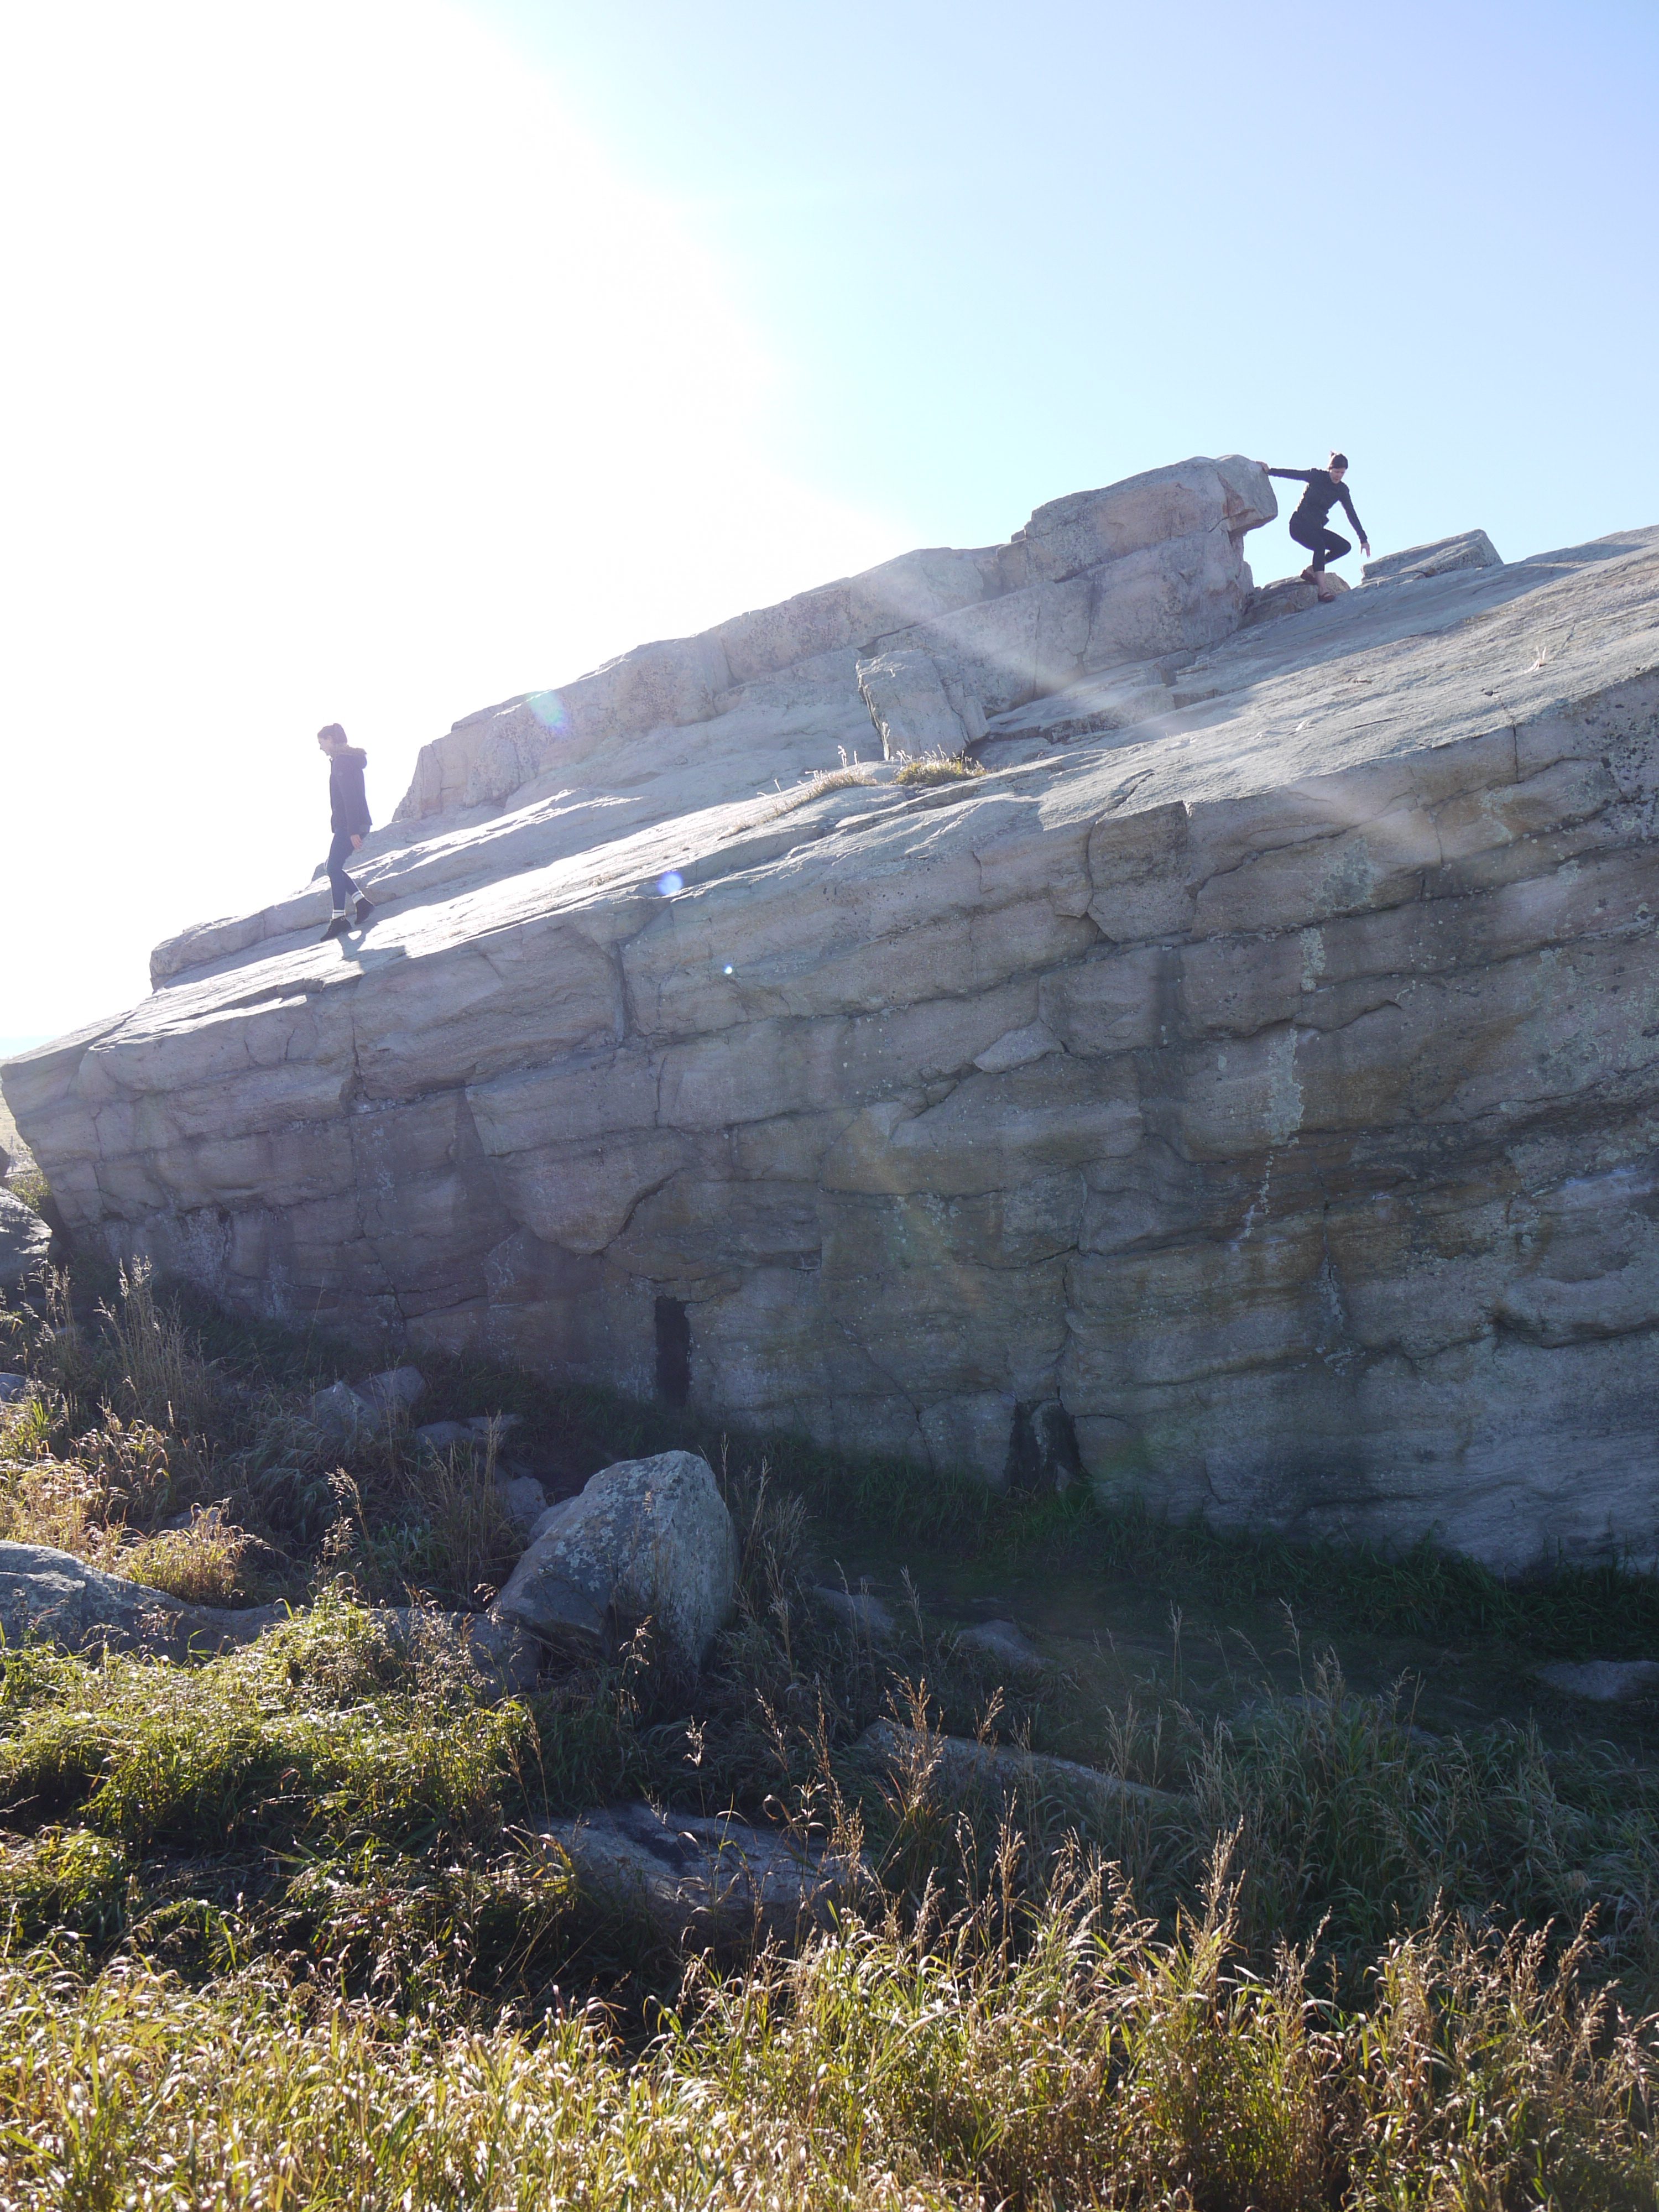 Visitors climbing on the 'Big Rock' which could potentially cause damage to the rock and pictograph panels.